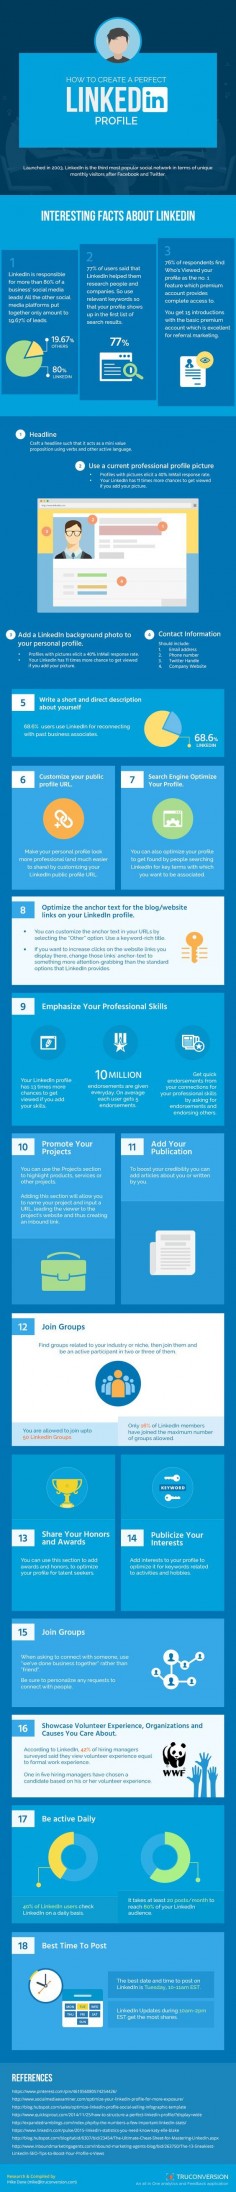 18 Tips to Create Your Perfect LinkedIn Profile